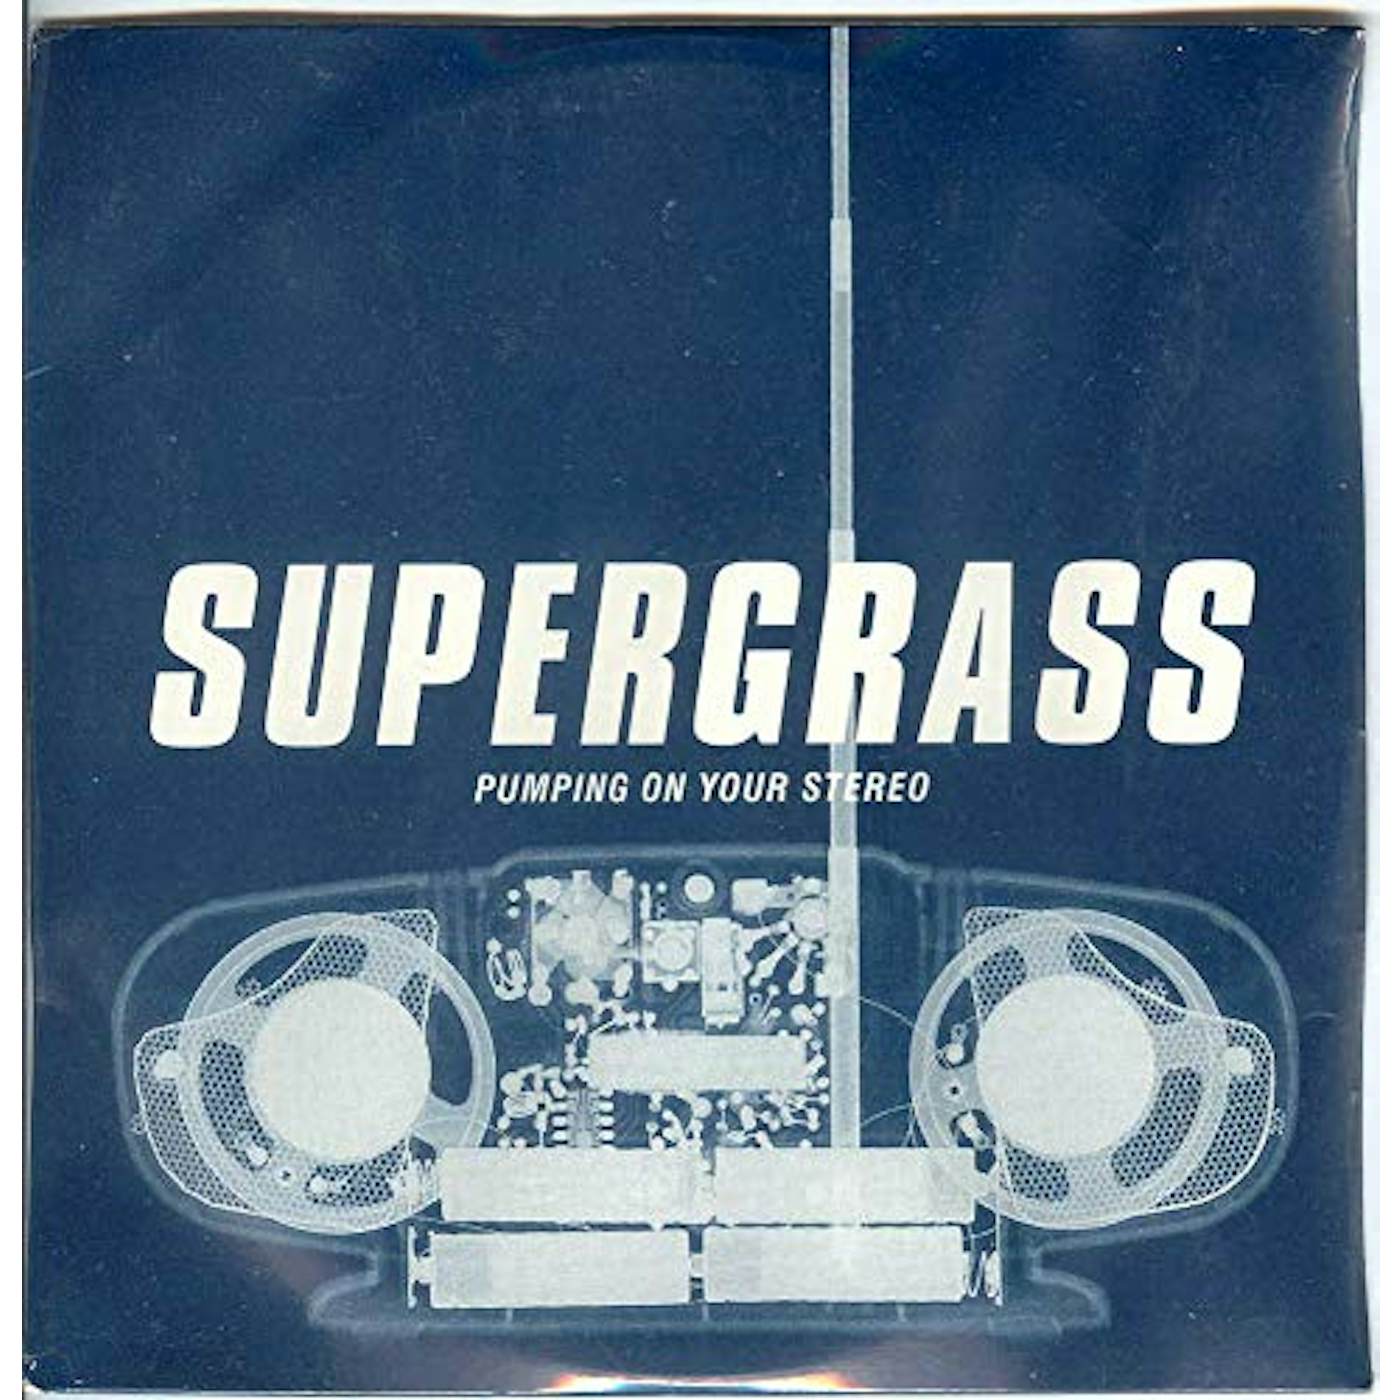 Supergrass PUMPING ON YOUR STEREO / MARY Vinyl Record